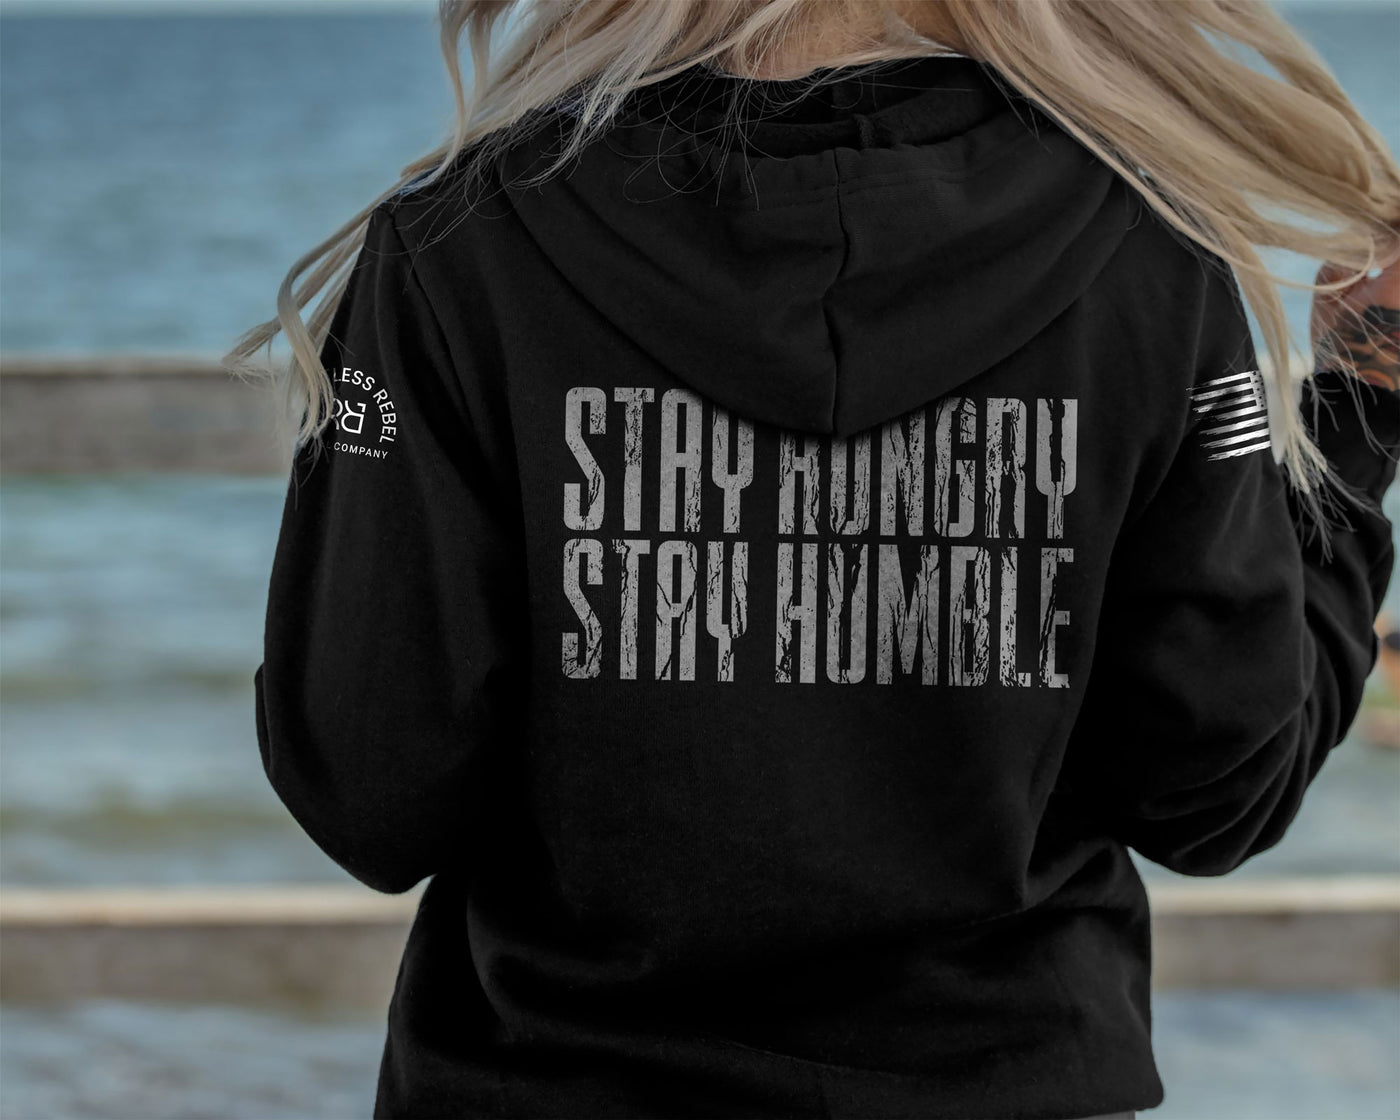 Stay Hungry Stay Humble | 2 | Women's Hoodie